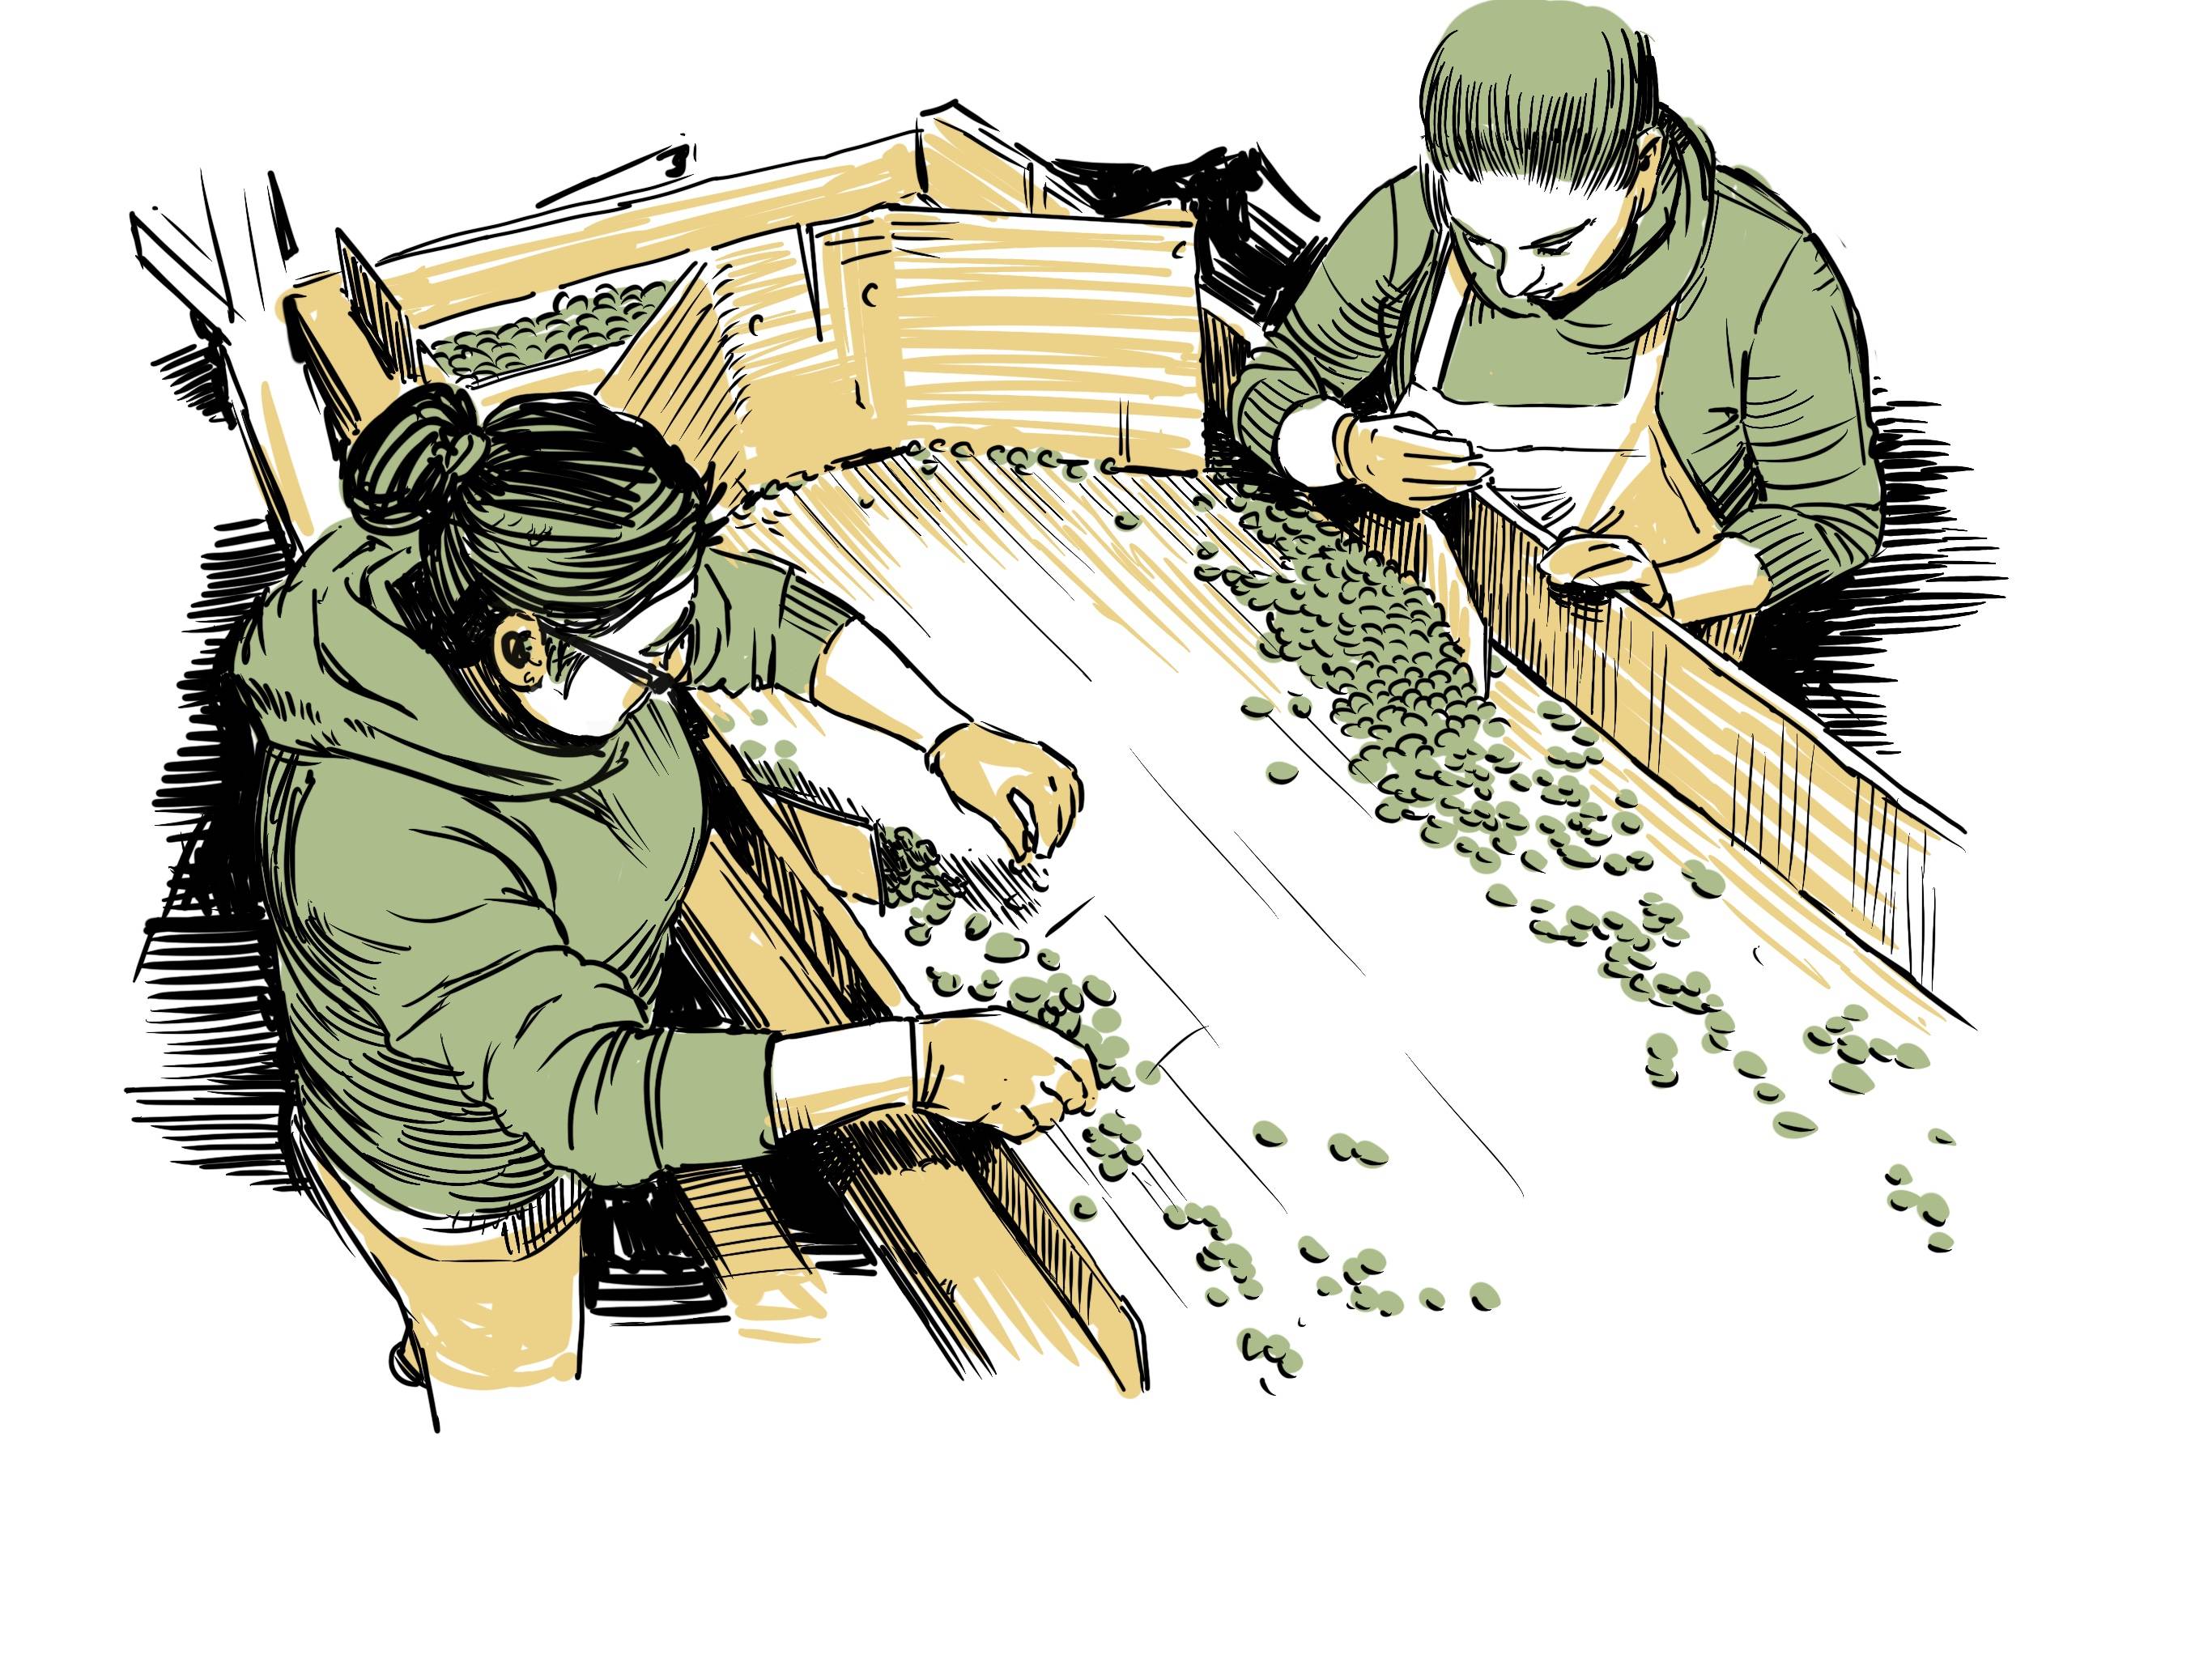 Illustration of cocoa beans being sorted by hand